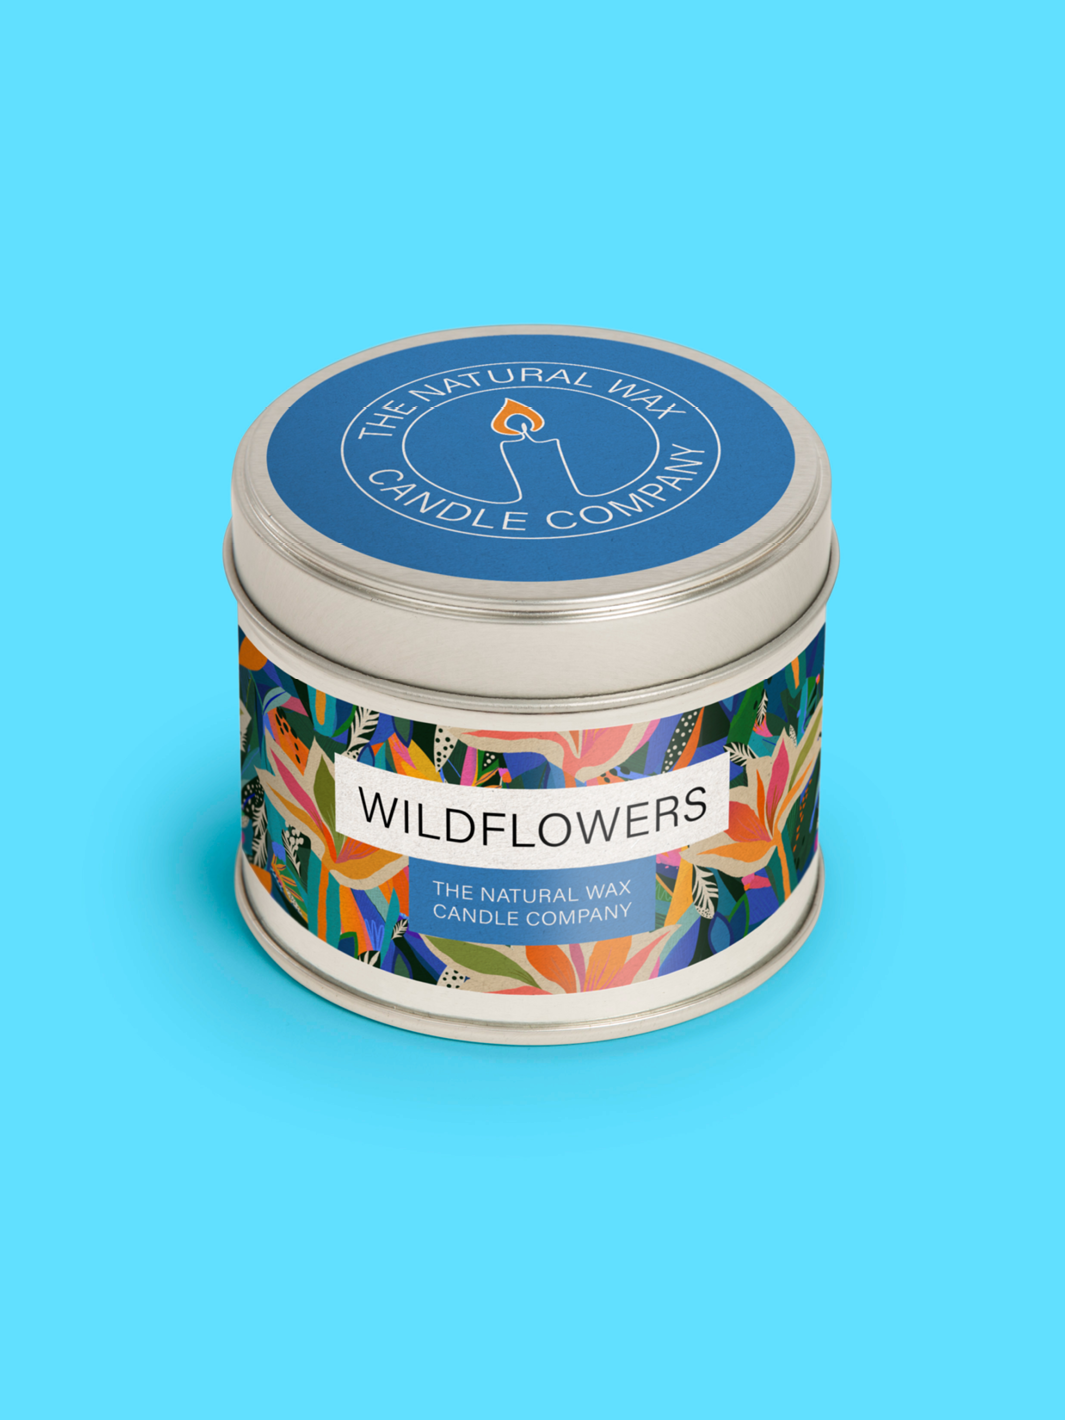 A picture of a candle tin with a wildflower fragrance label.